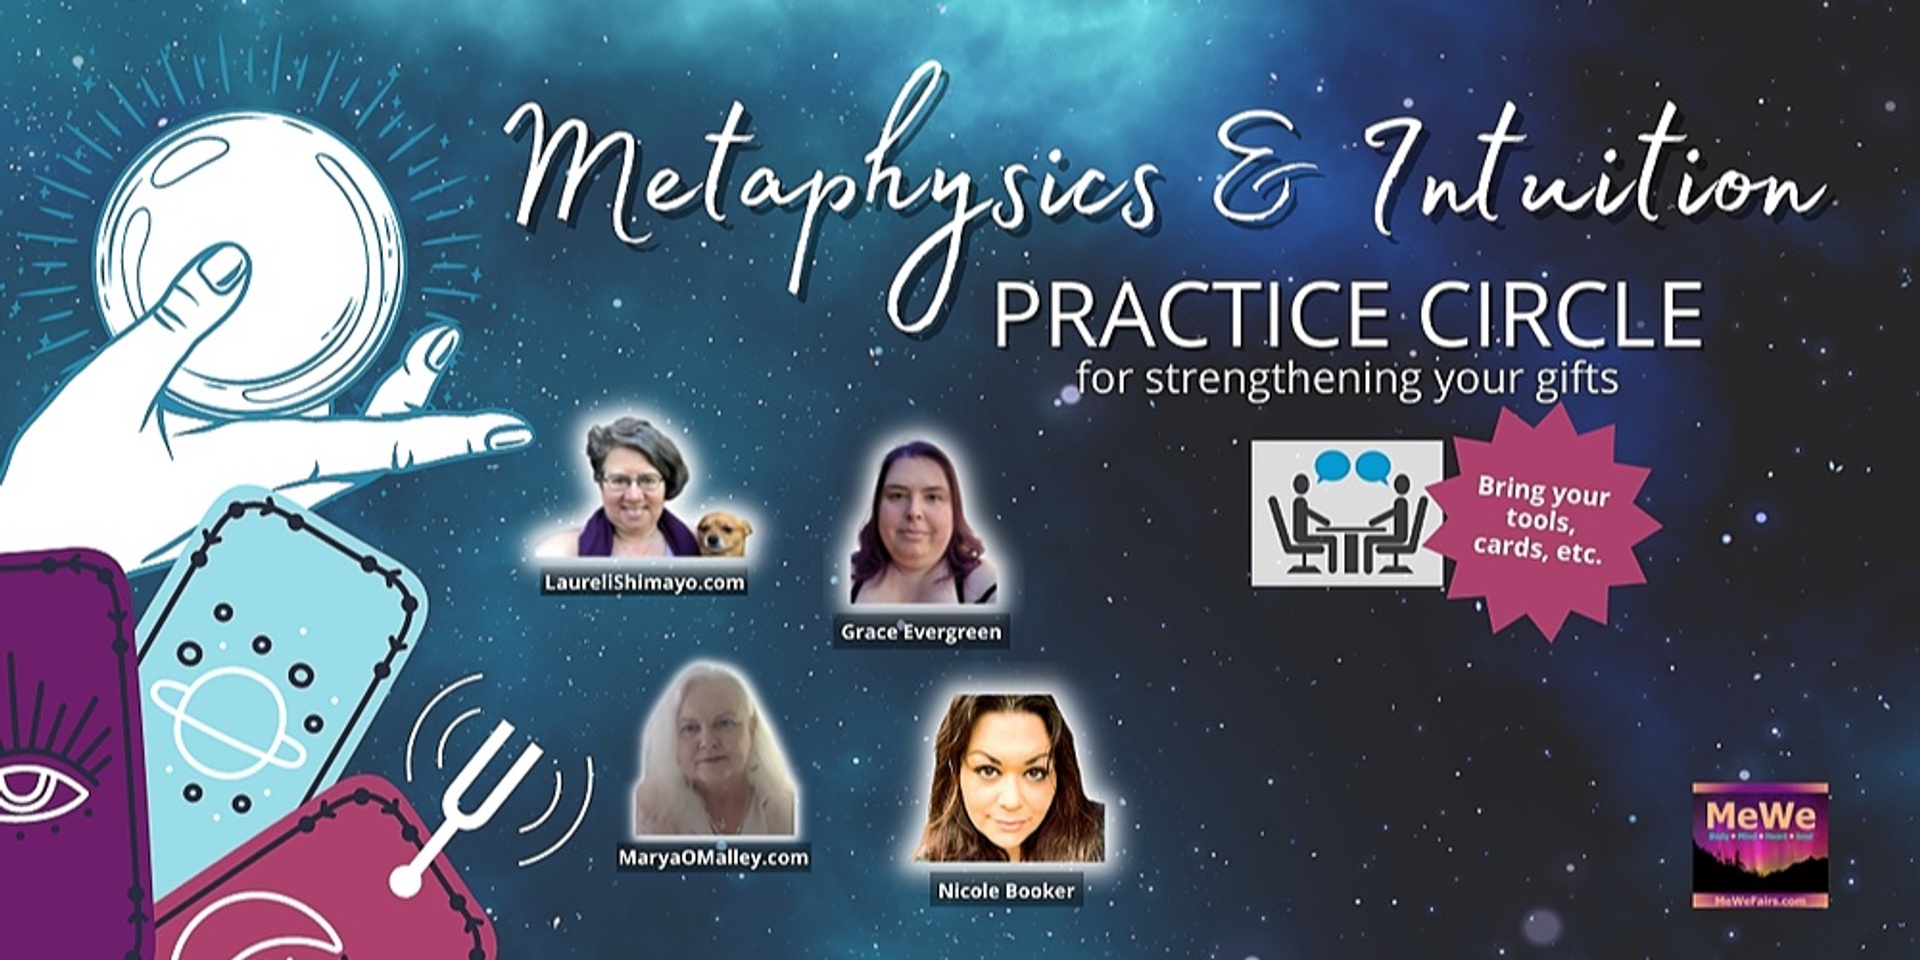 MeWe Metaphysics & Intuition PRACTICE Circle for Strengthening Your Gifts